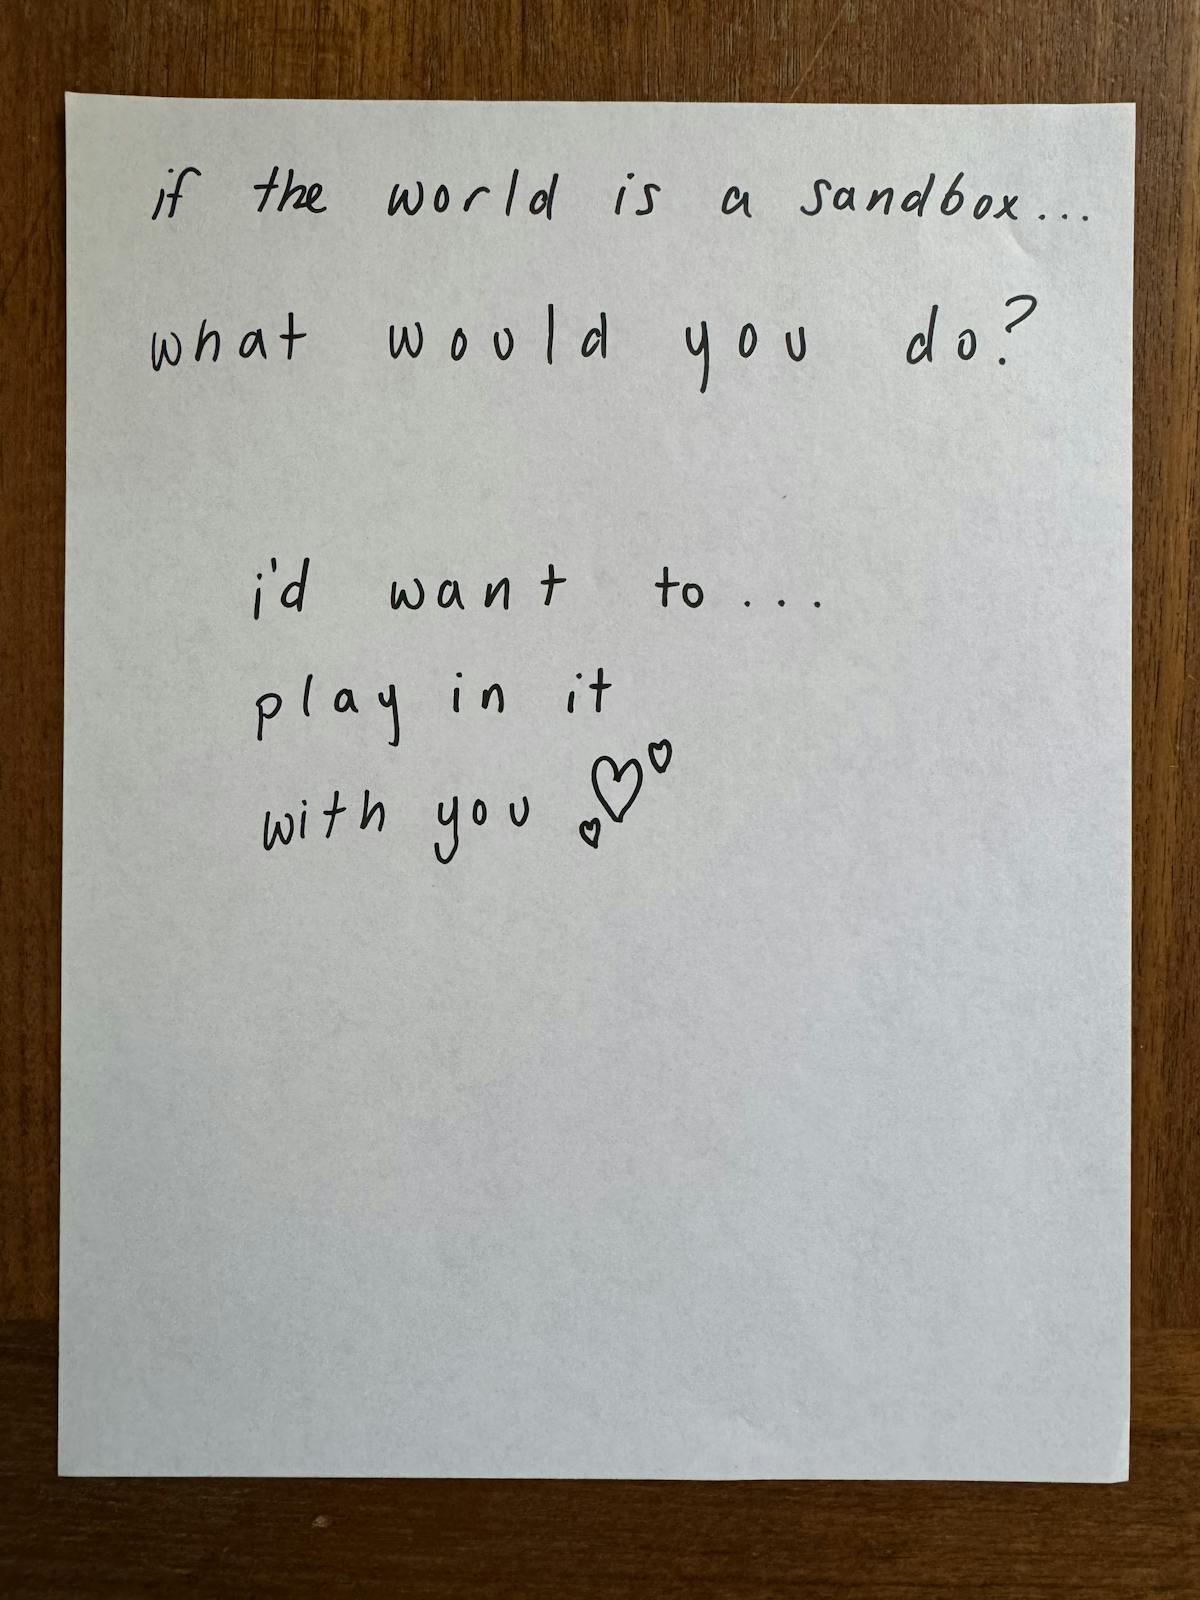 a piece of paper with the words 'if the world is a sandbox... what would you do? i'd want to... play in it with you ♥' written on it